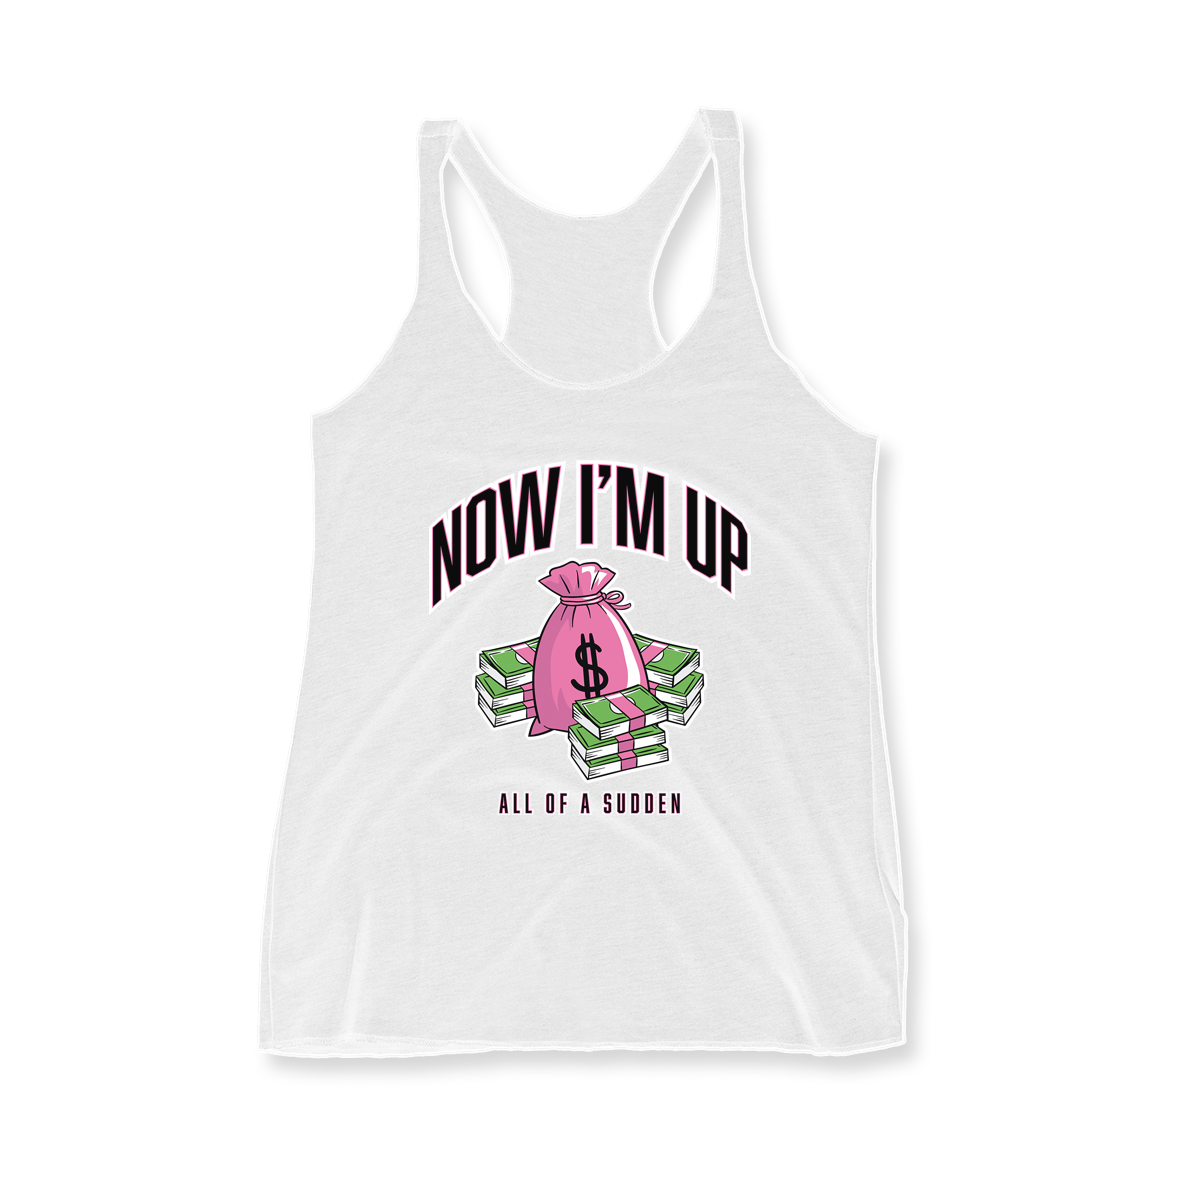 Now I'm Up in Pink Women's Racerback Tank